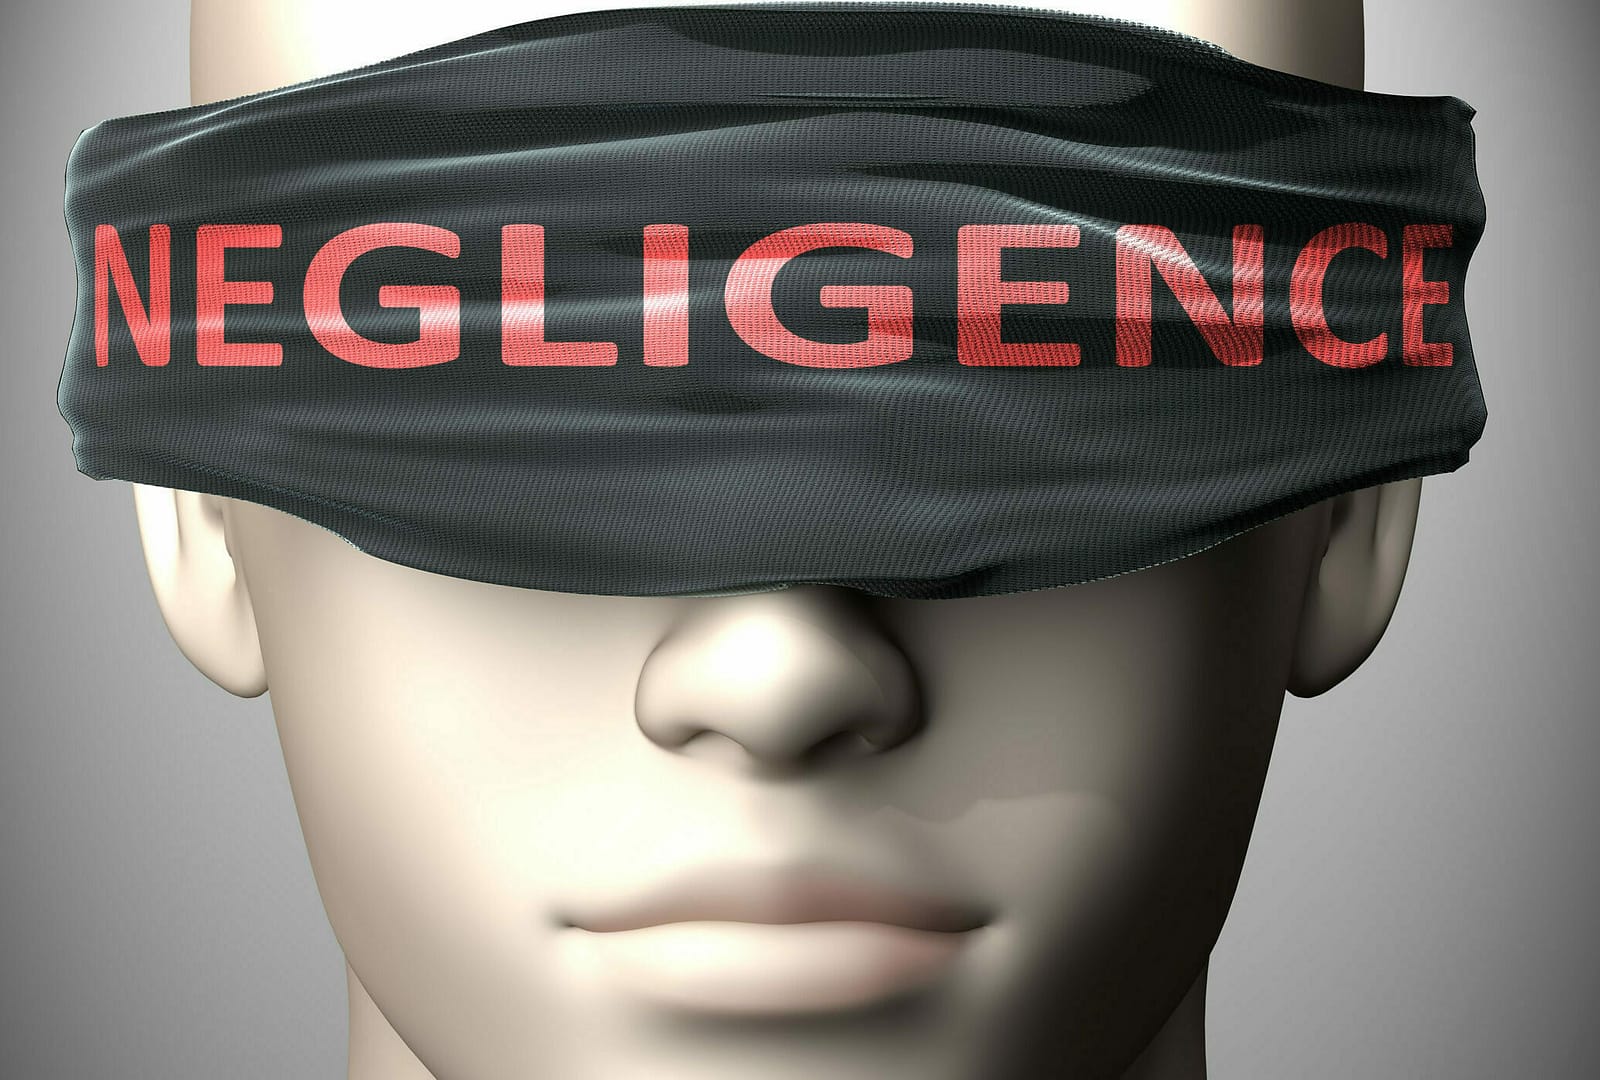 Negligence can make things harder to see or makes us blind to the reality - pictured as word Negligence on a blindfold to symbolize denial and that Negligence can cloud perception